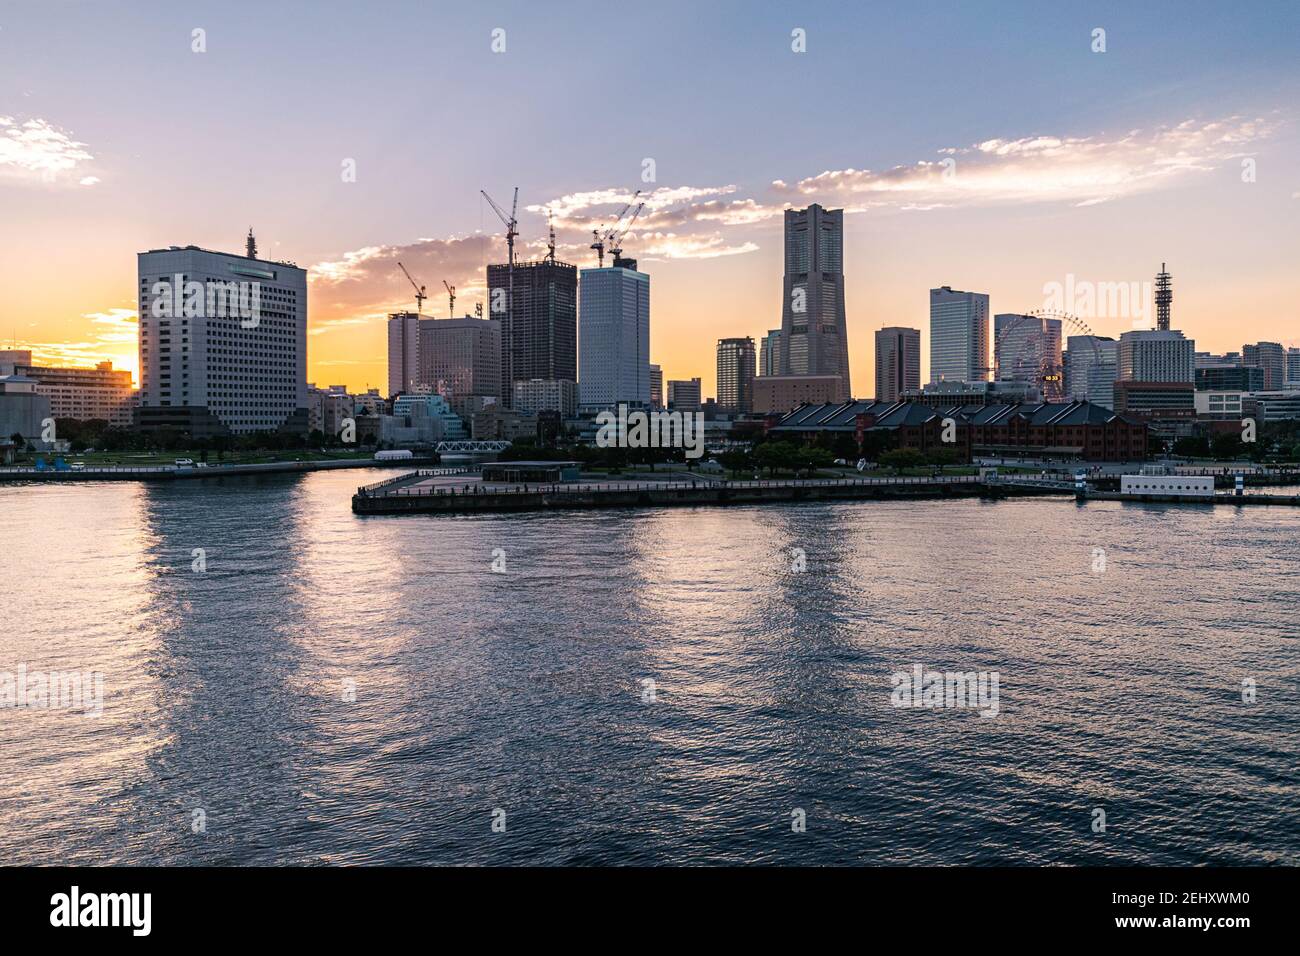 Colorful sunset over the buildings at the Yokohama Ferry Terminal. Stock Photo